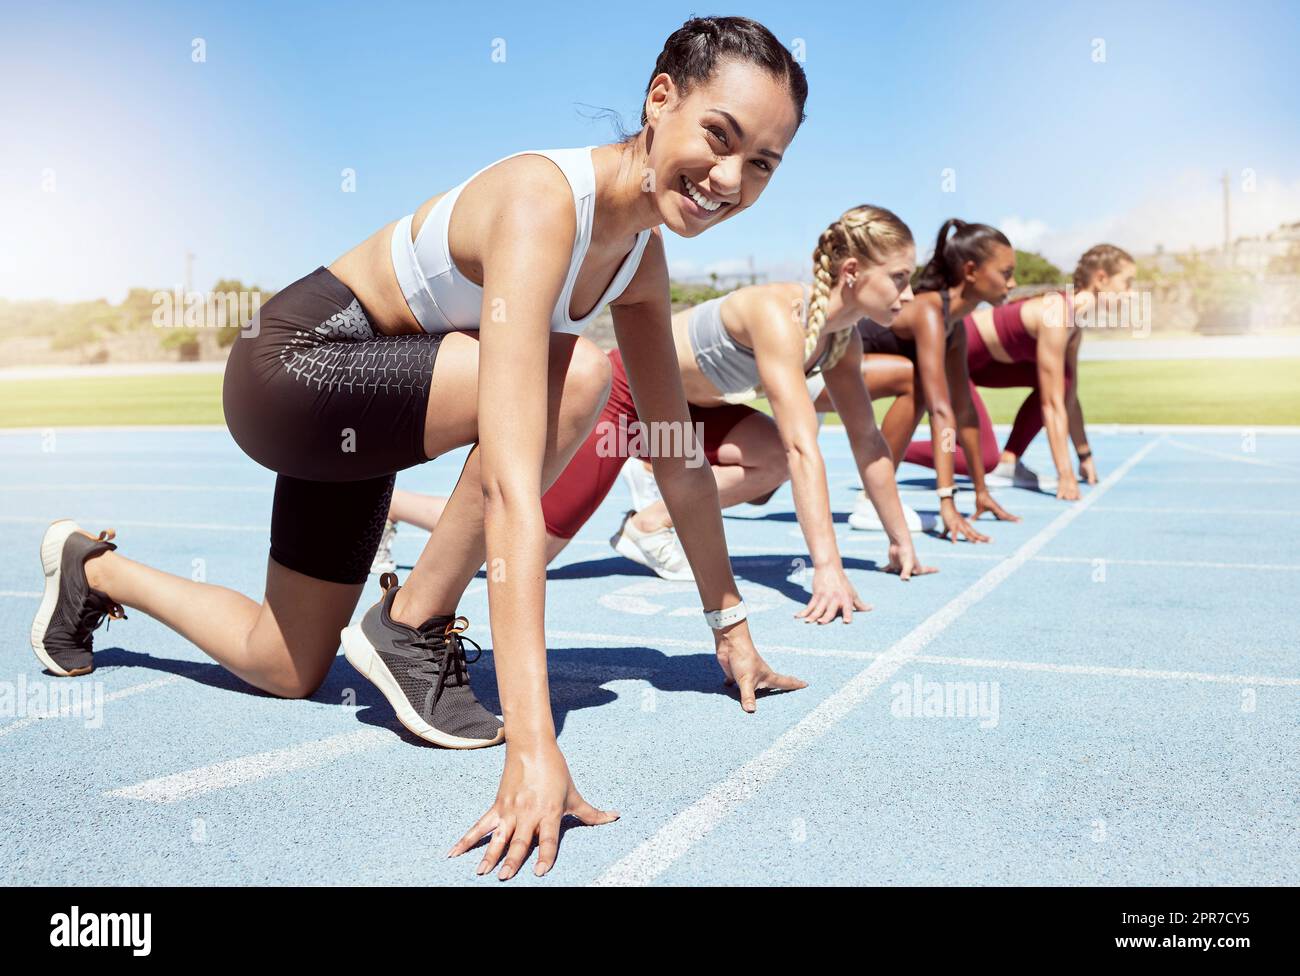 Portrait of female athlete motivated and ready to compete in track and field olympic event. Diverse group of competitive women with hands on the starting line ready to race and determined to win Stock Photo